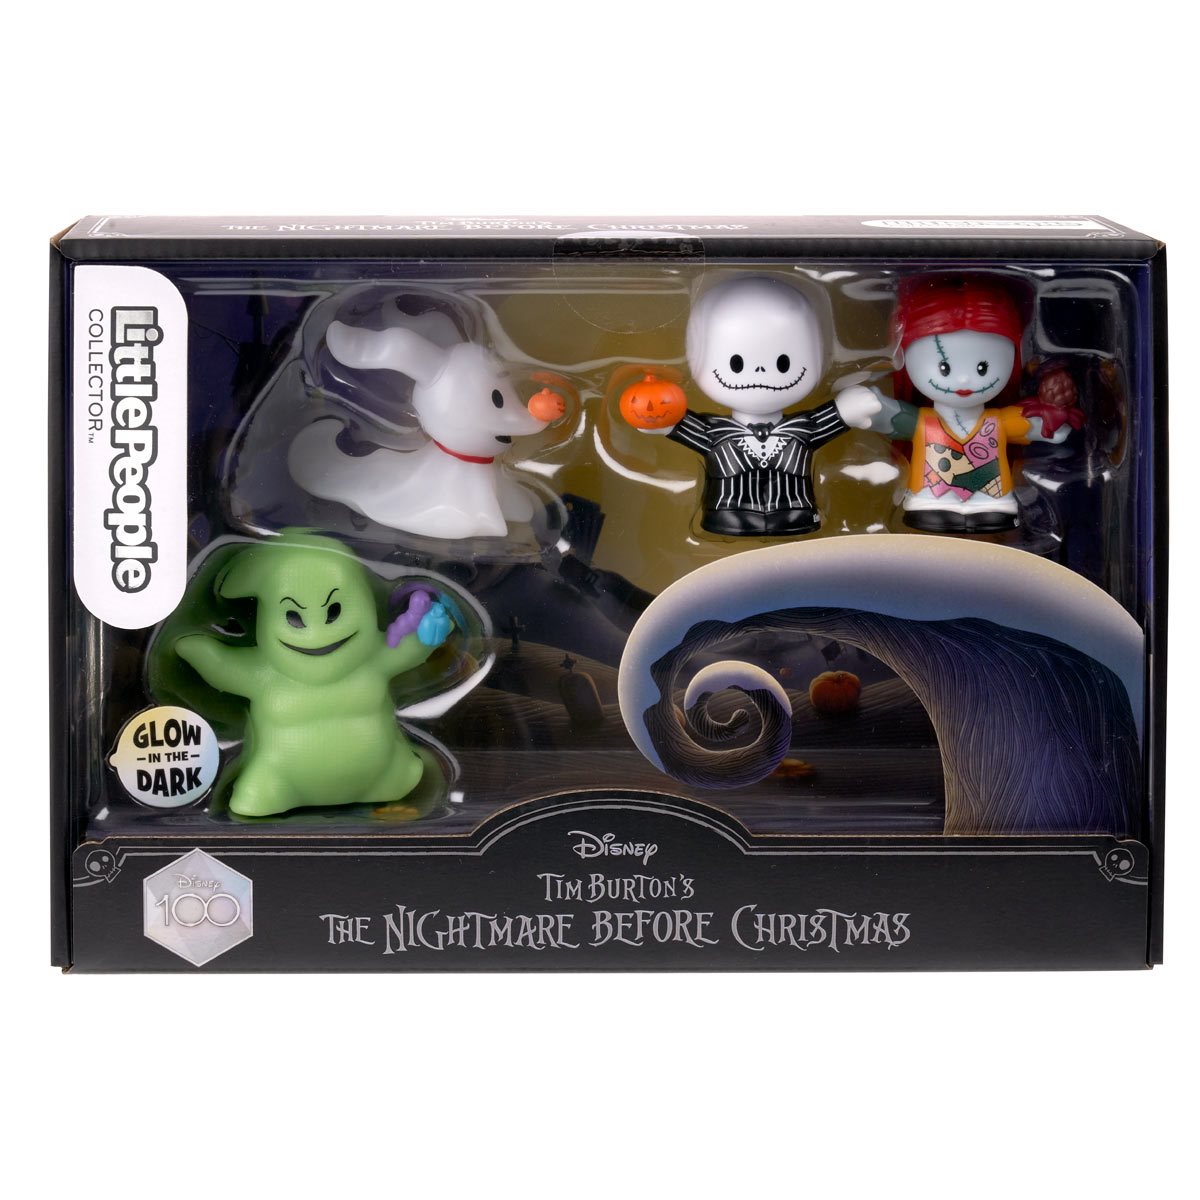 Little People Collector Disney Tim Burton’s The Nightmare Before Christmas